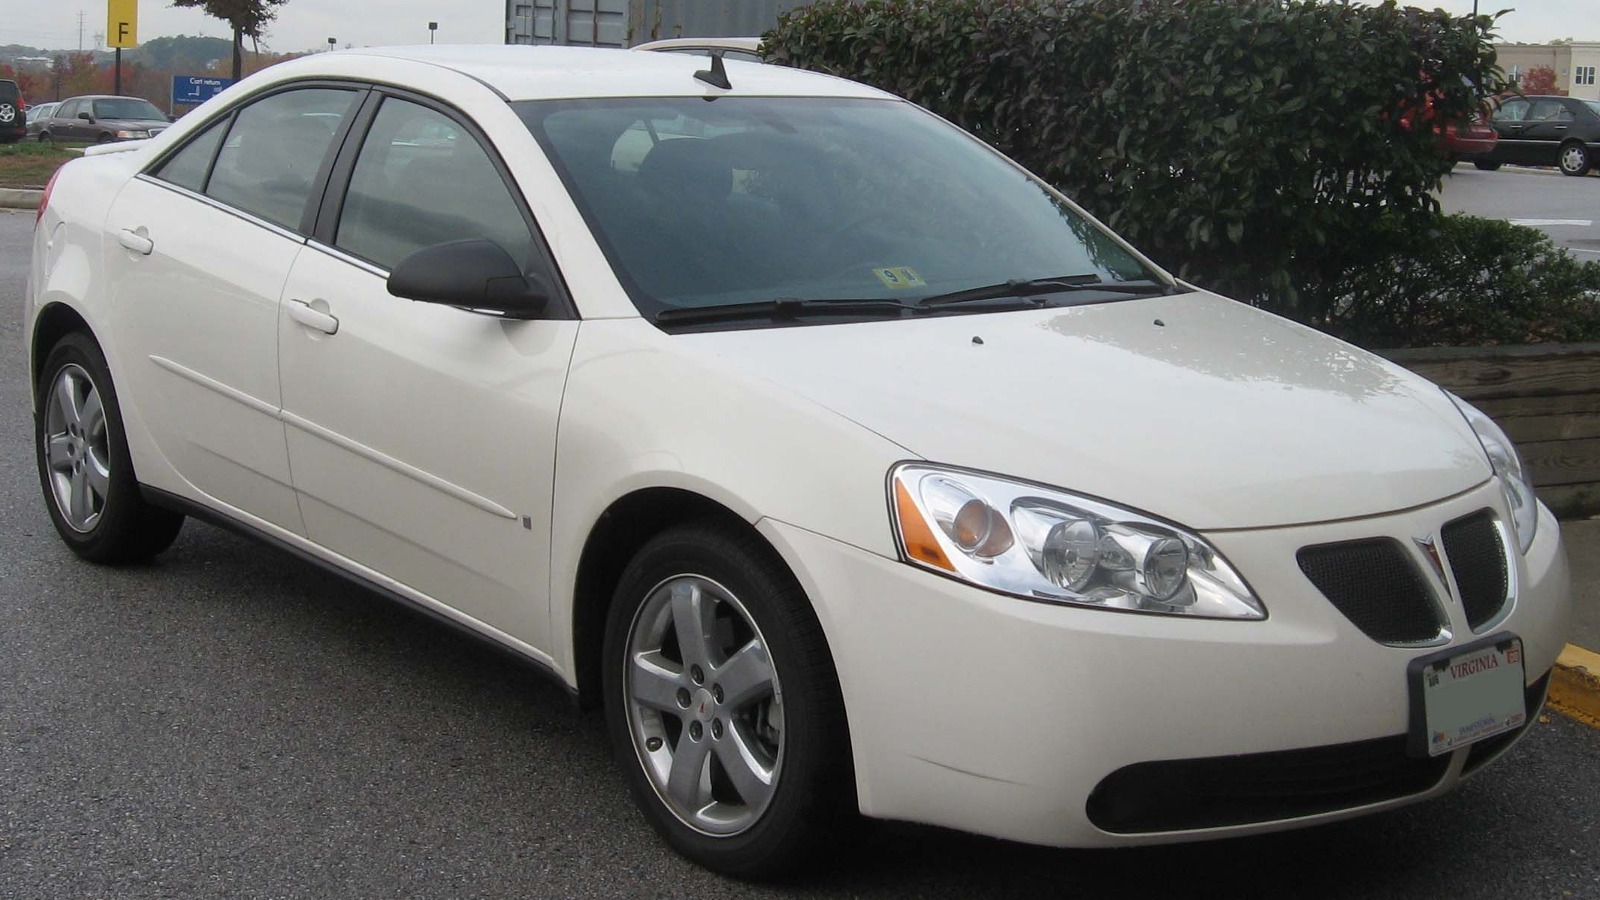 Common Problems A 2008 Pontiac G6 GT May Have (And The Cost To Fix Them)